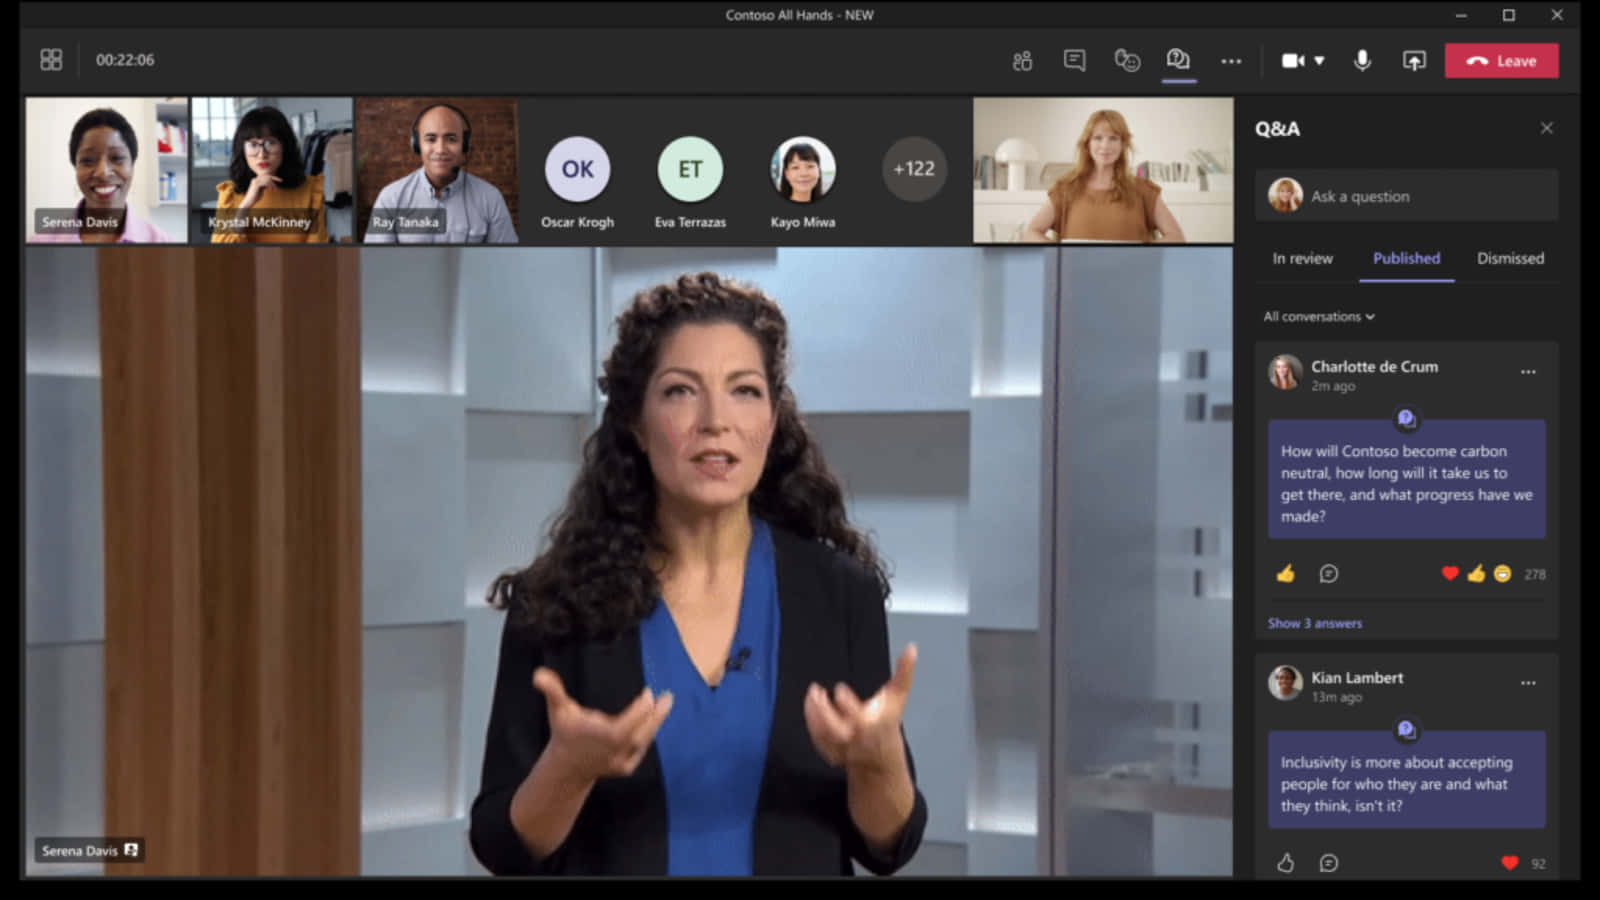 Microsoft Teams provides an intuitive platform to collaborate and communicate.